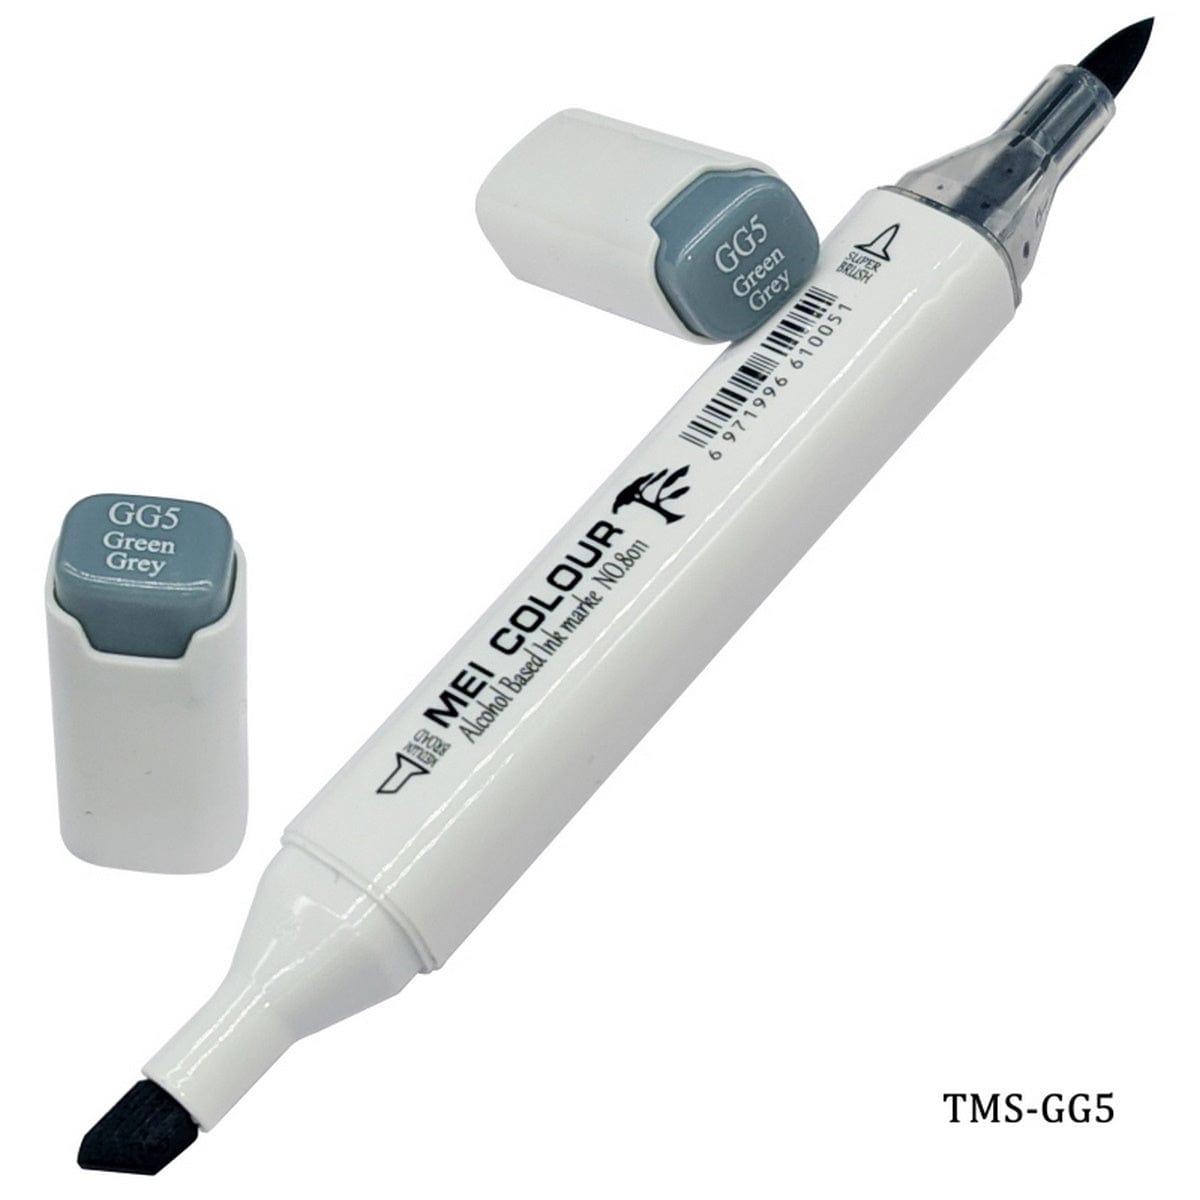 jags-mumbai Marker Touch Marker Soft 2in1 Pen Green Grey TMS-GG5